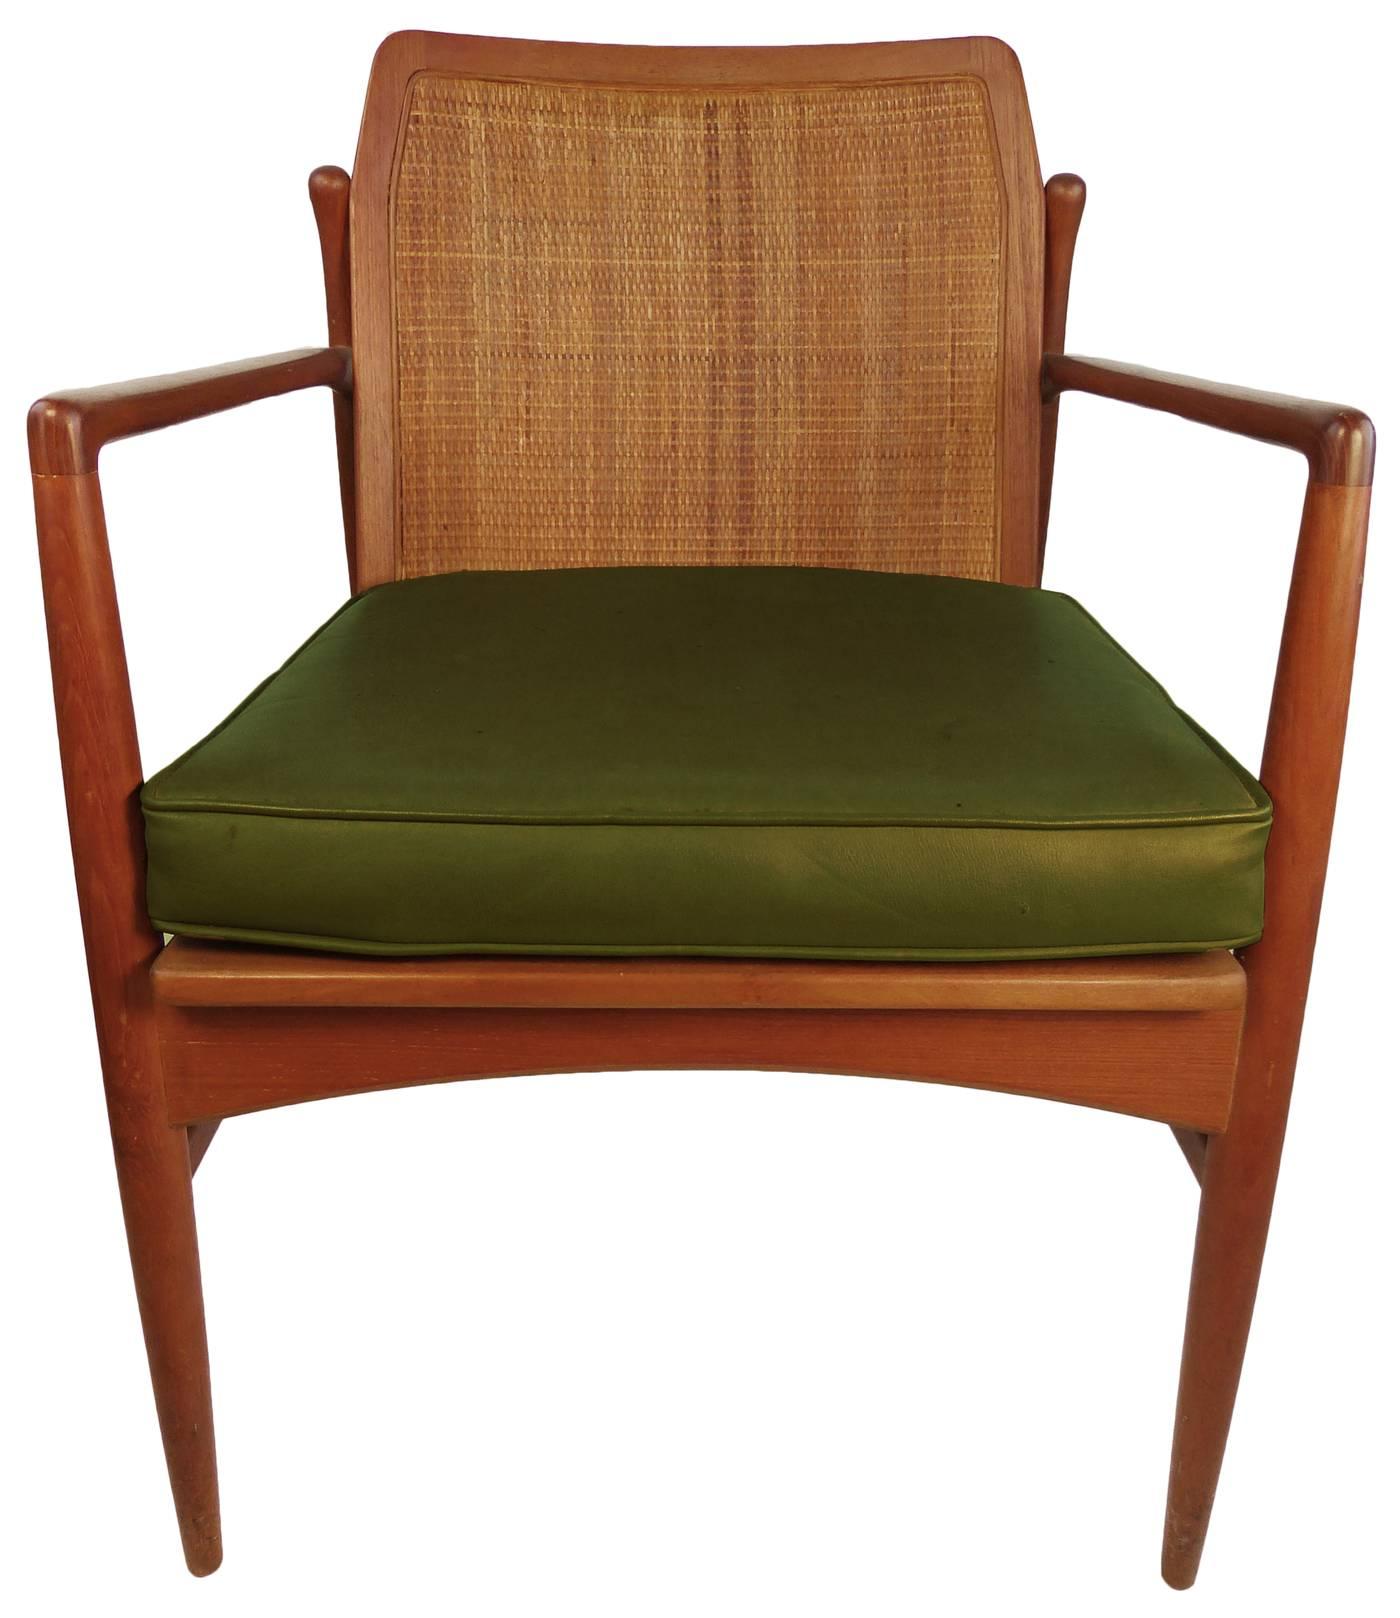 A great Mid-Century Modern armchair by Ib-Kofod Larsen with caned back and original vinyl seat in hunter green. Measures: 23.5